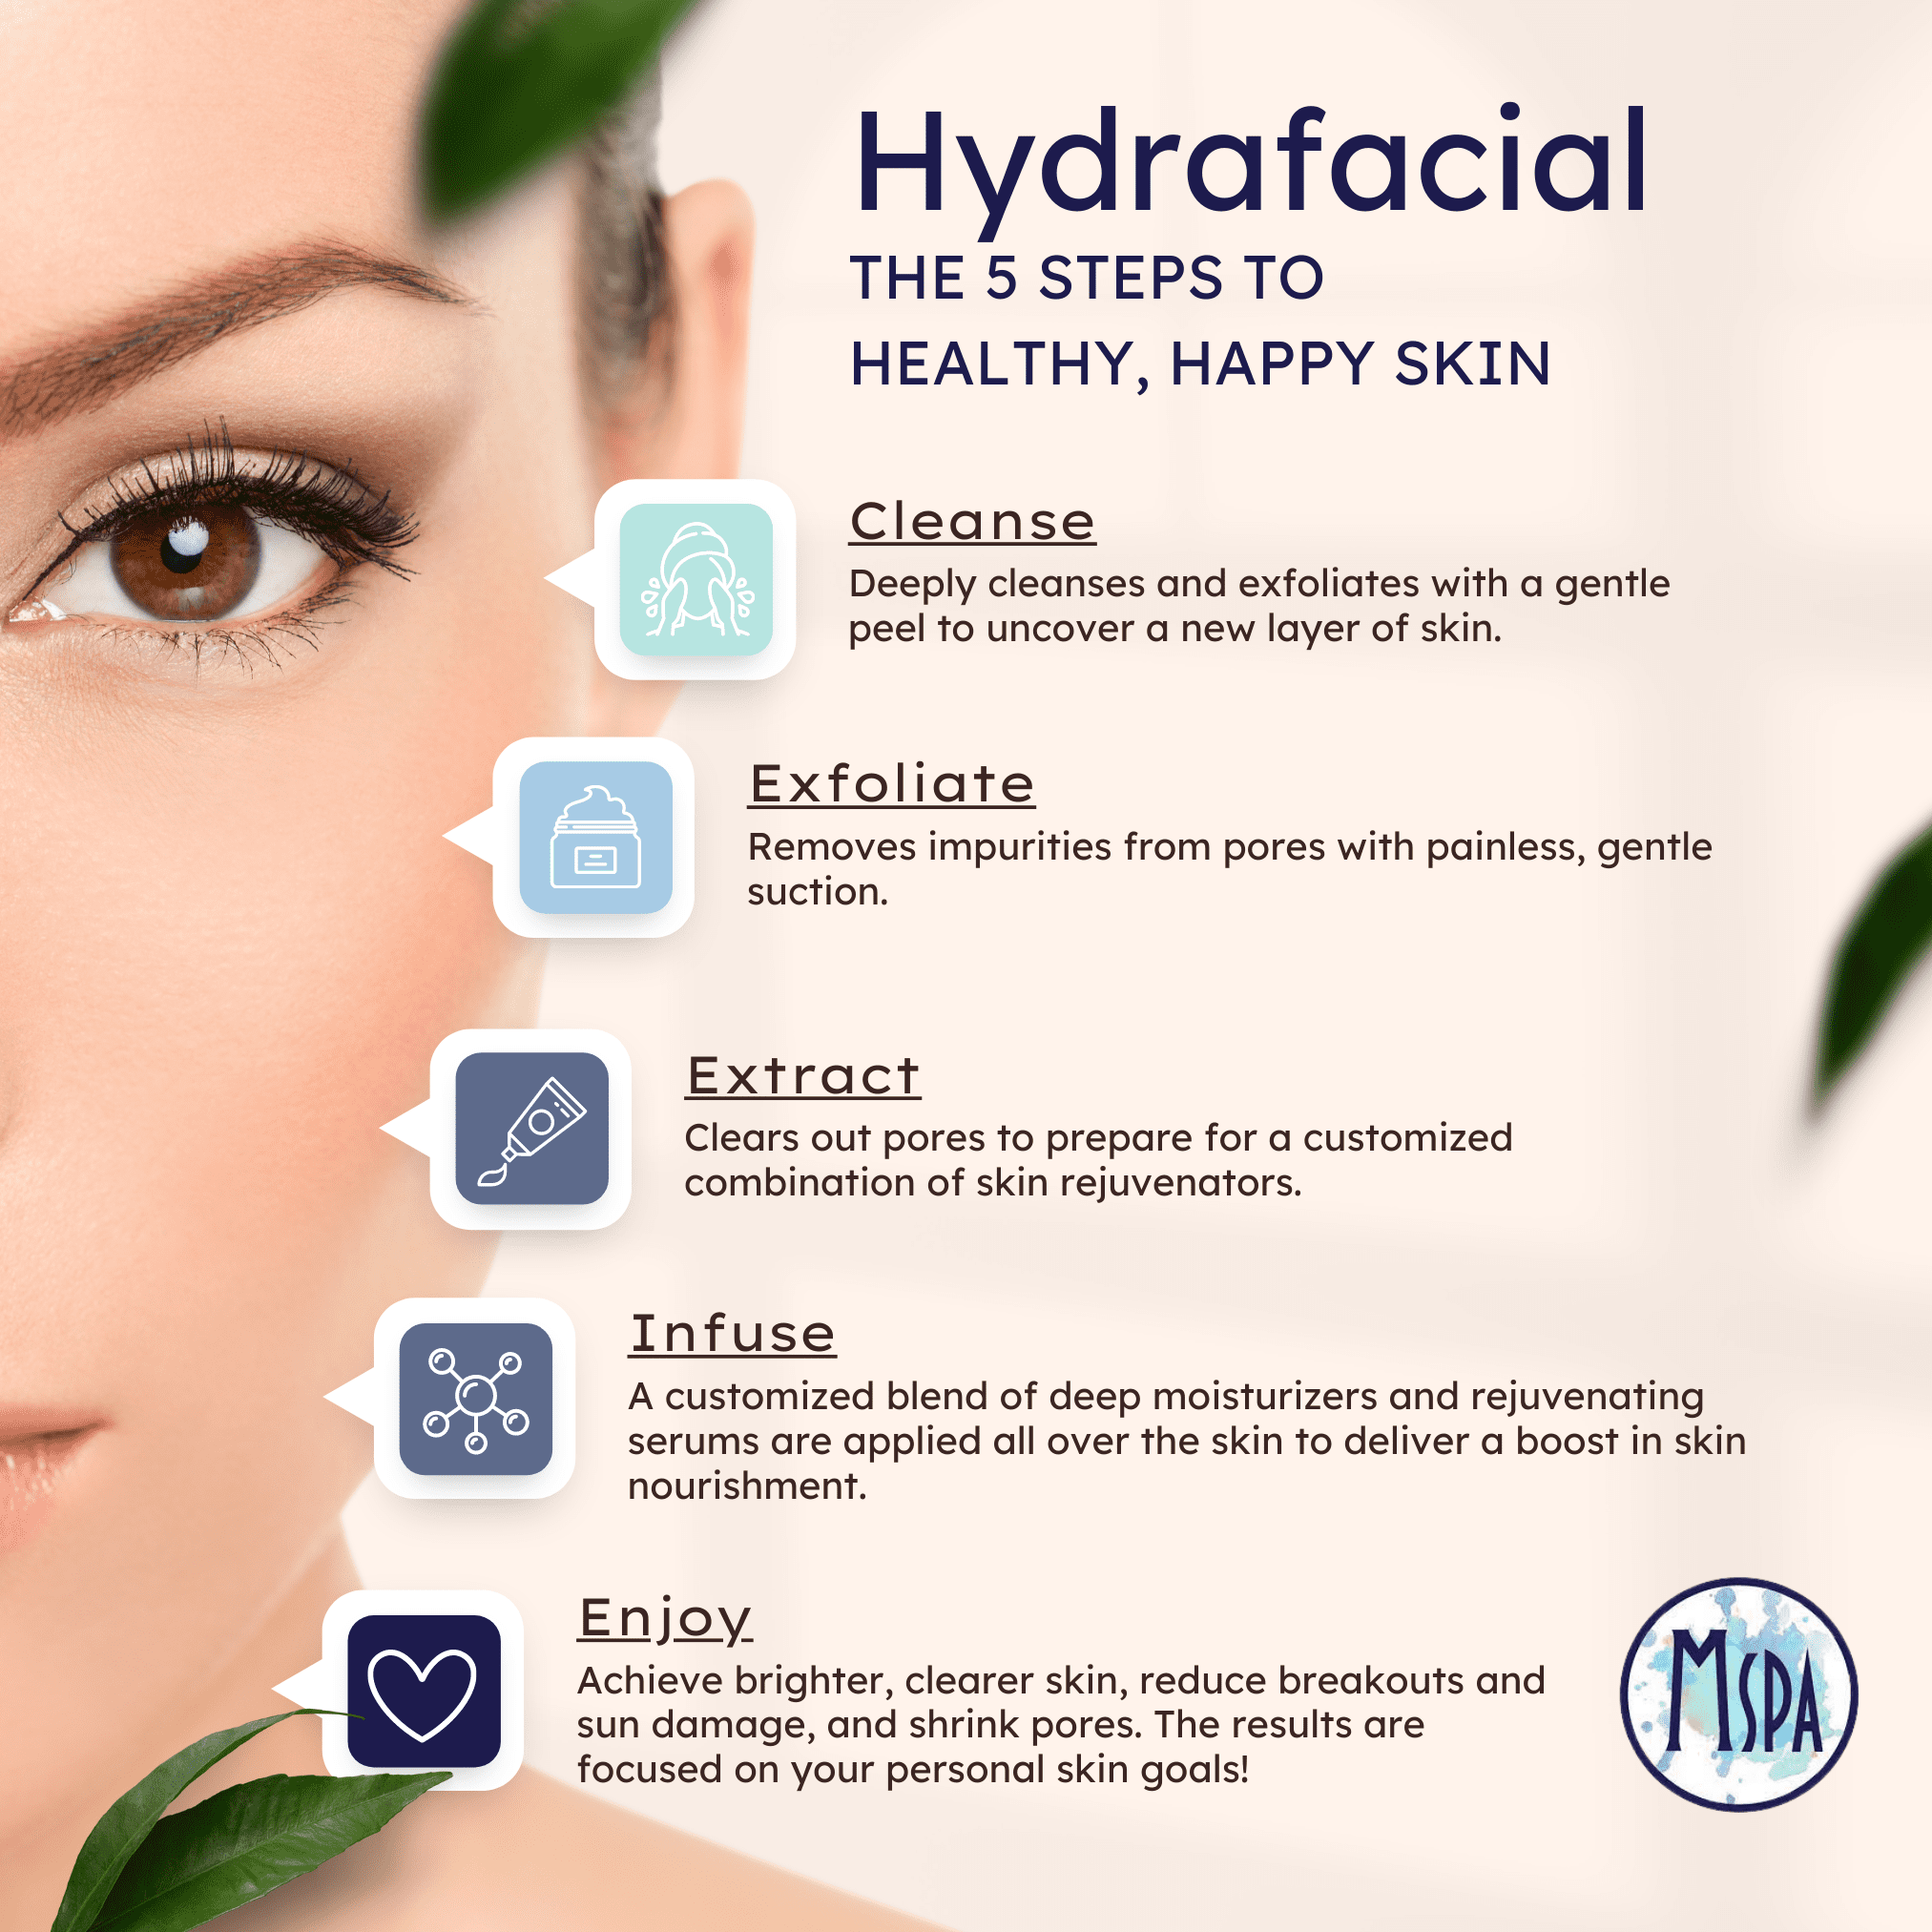 Hydrafacial: The 5 Steps to Healthy, Happy Skin